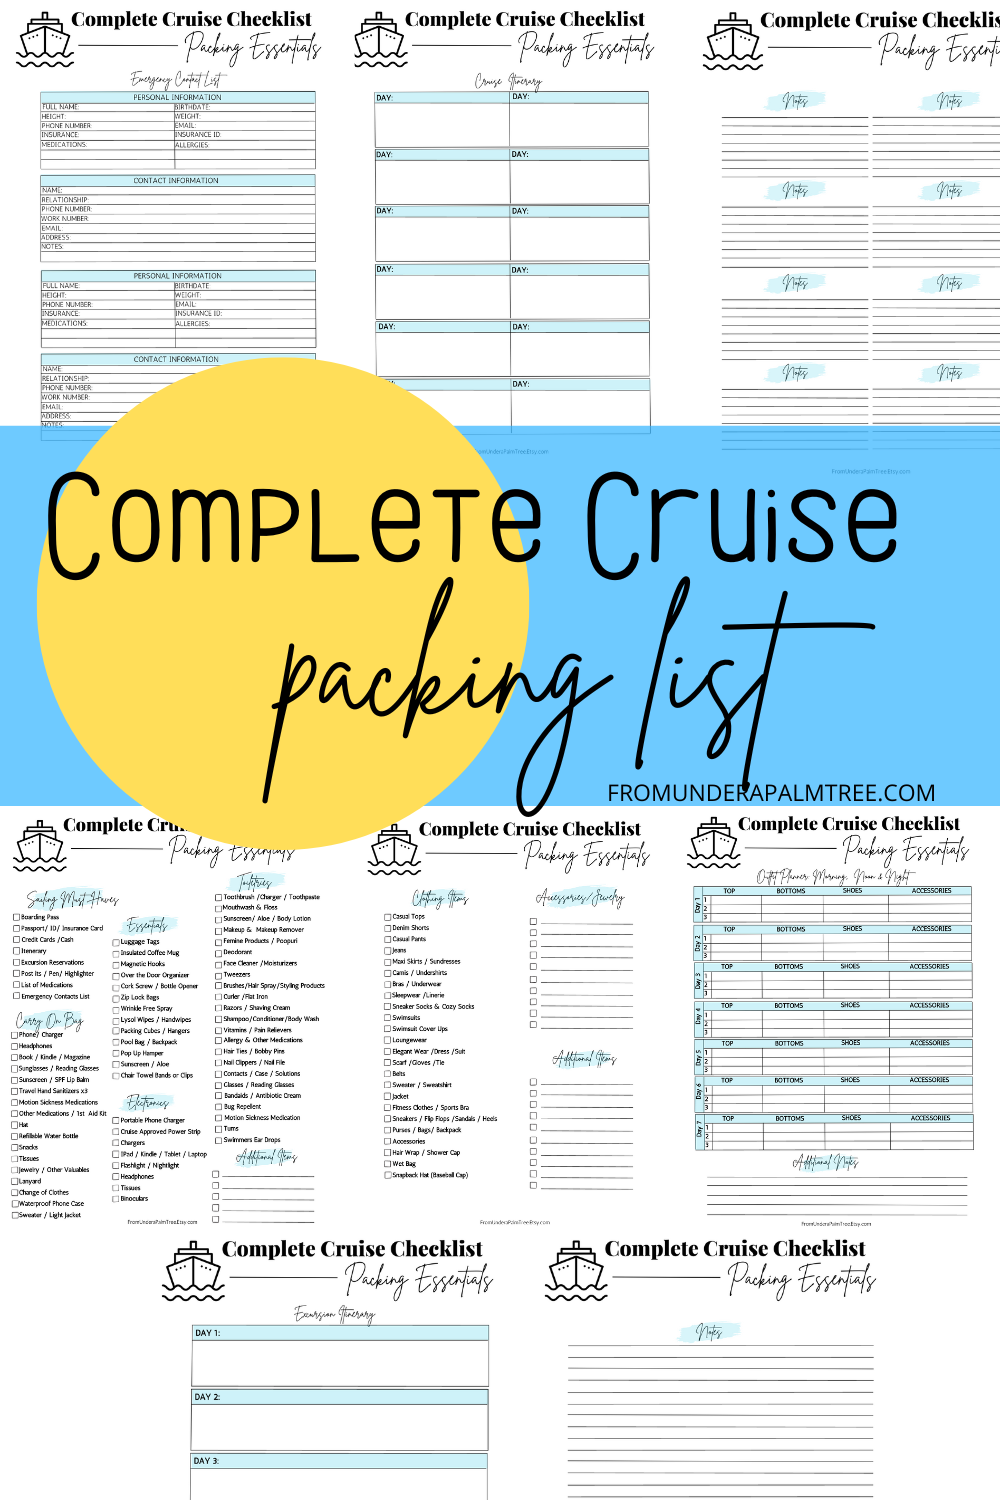 complete cruise packing list | cruise packing list | cruise packing essentials | cruise essentials | what to pack for a caribbean cruise | what to pack for a summer cruise | cruise attire | cruise outfits | cruise outfit planner | cruise checklist | cruise packing checklist | cruise emergency list | cruise intinerary | cruise excursion itinerary | cruise door decor | cruise necessities | cruise must haves | cruise amazon finds | cruise essentials from amazon |